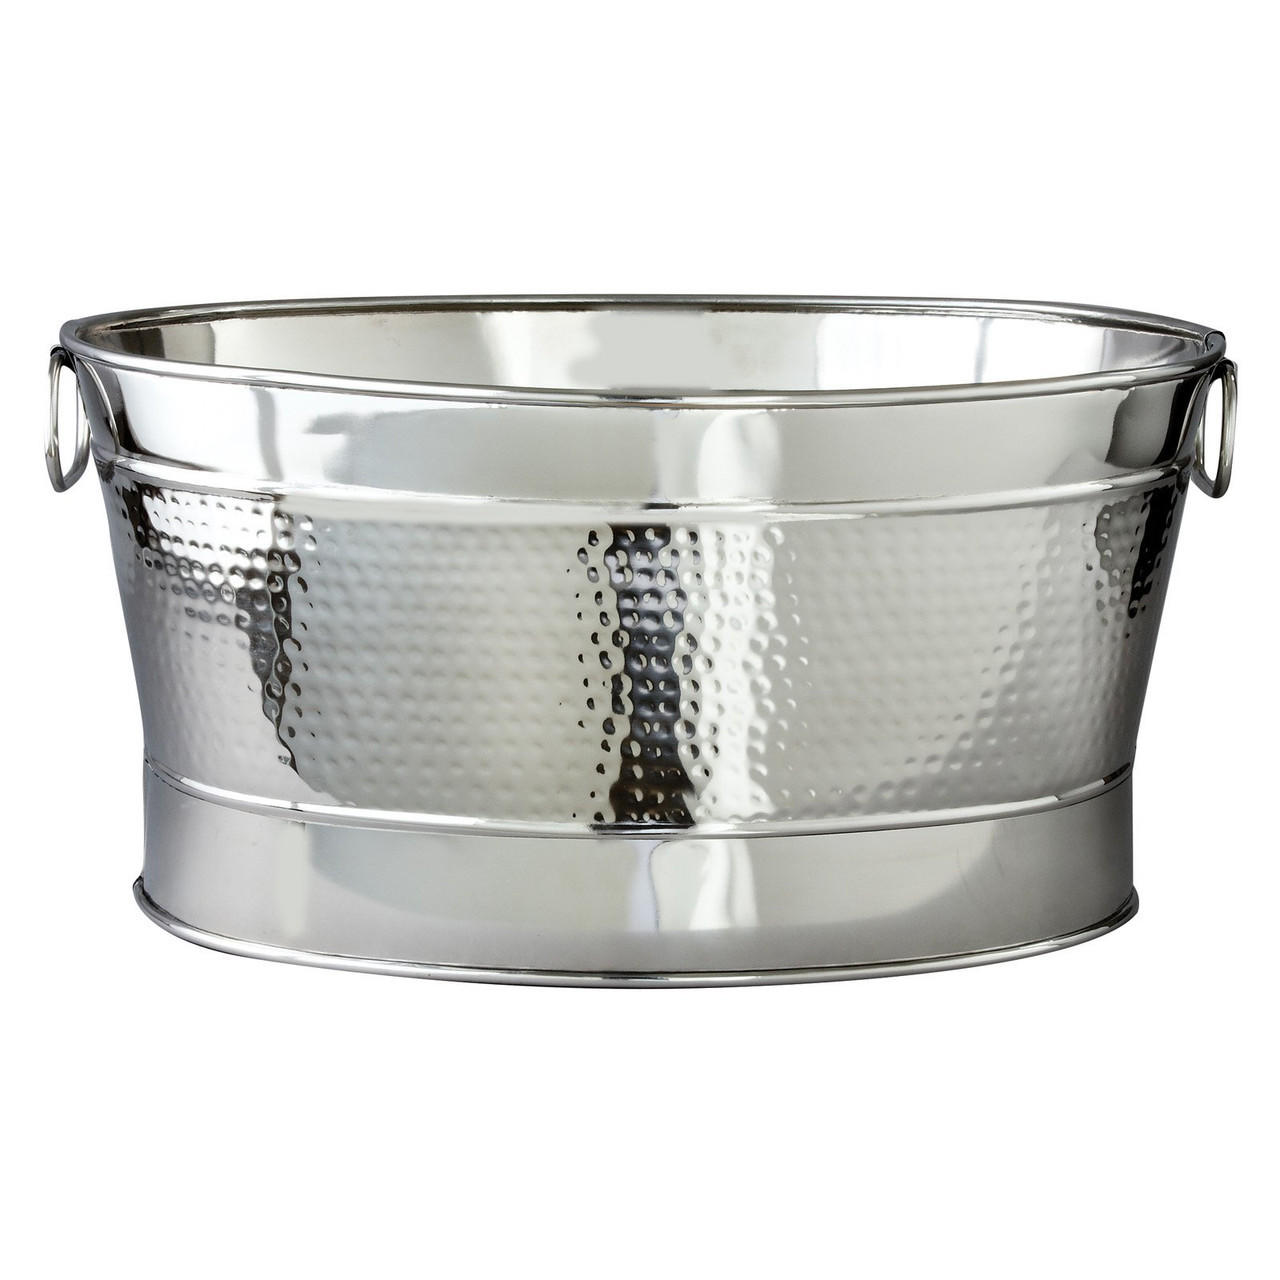  Holdinghausen-Weeks Hammered Oval Party Tub 